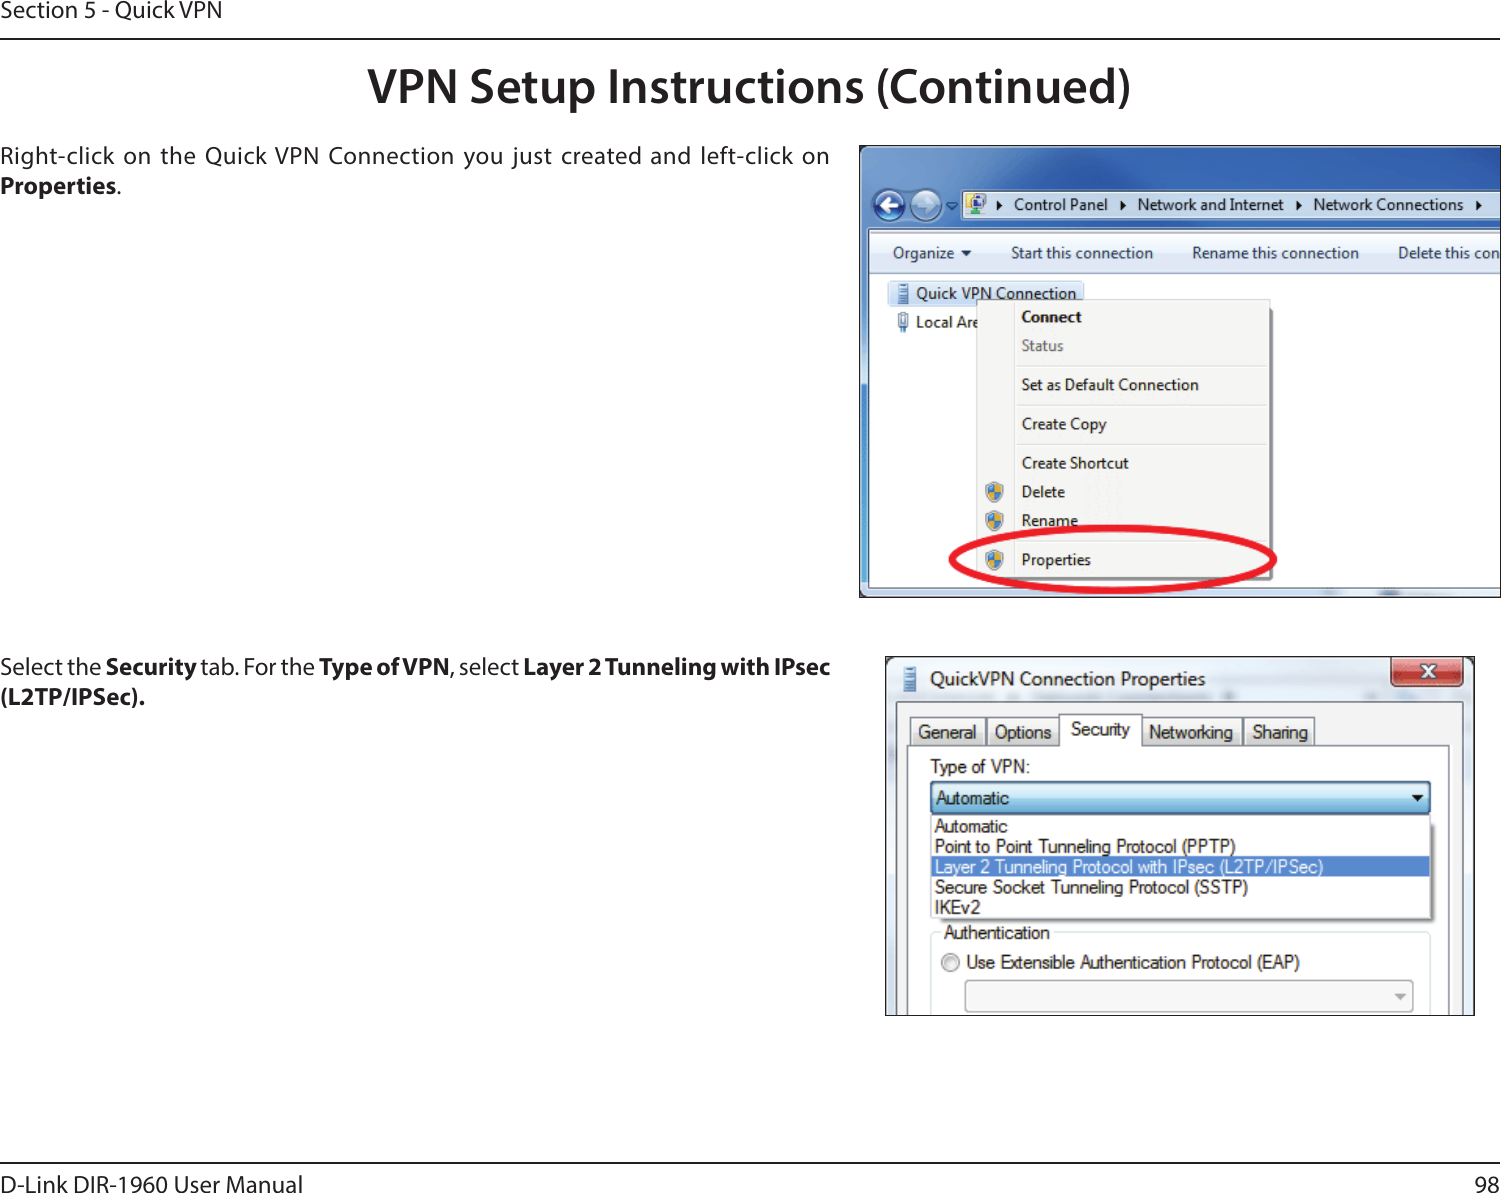 98D-Link DIR-1960 User ManualSection 5 - Quick VPNSelect the Security tab. For the Type of VPN, select Layer2Tunneling with IPsec (L2TP/IPSec). Right-click on the Quick VPN Connection you just created and left-click on Properties.VPN Setup Instructions (Continued)